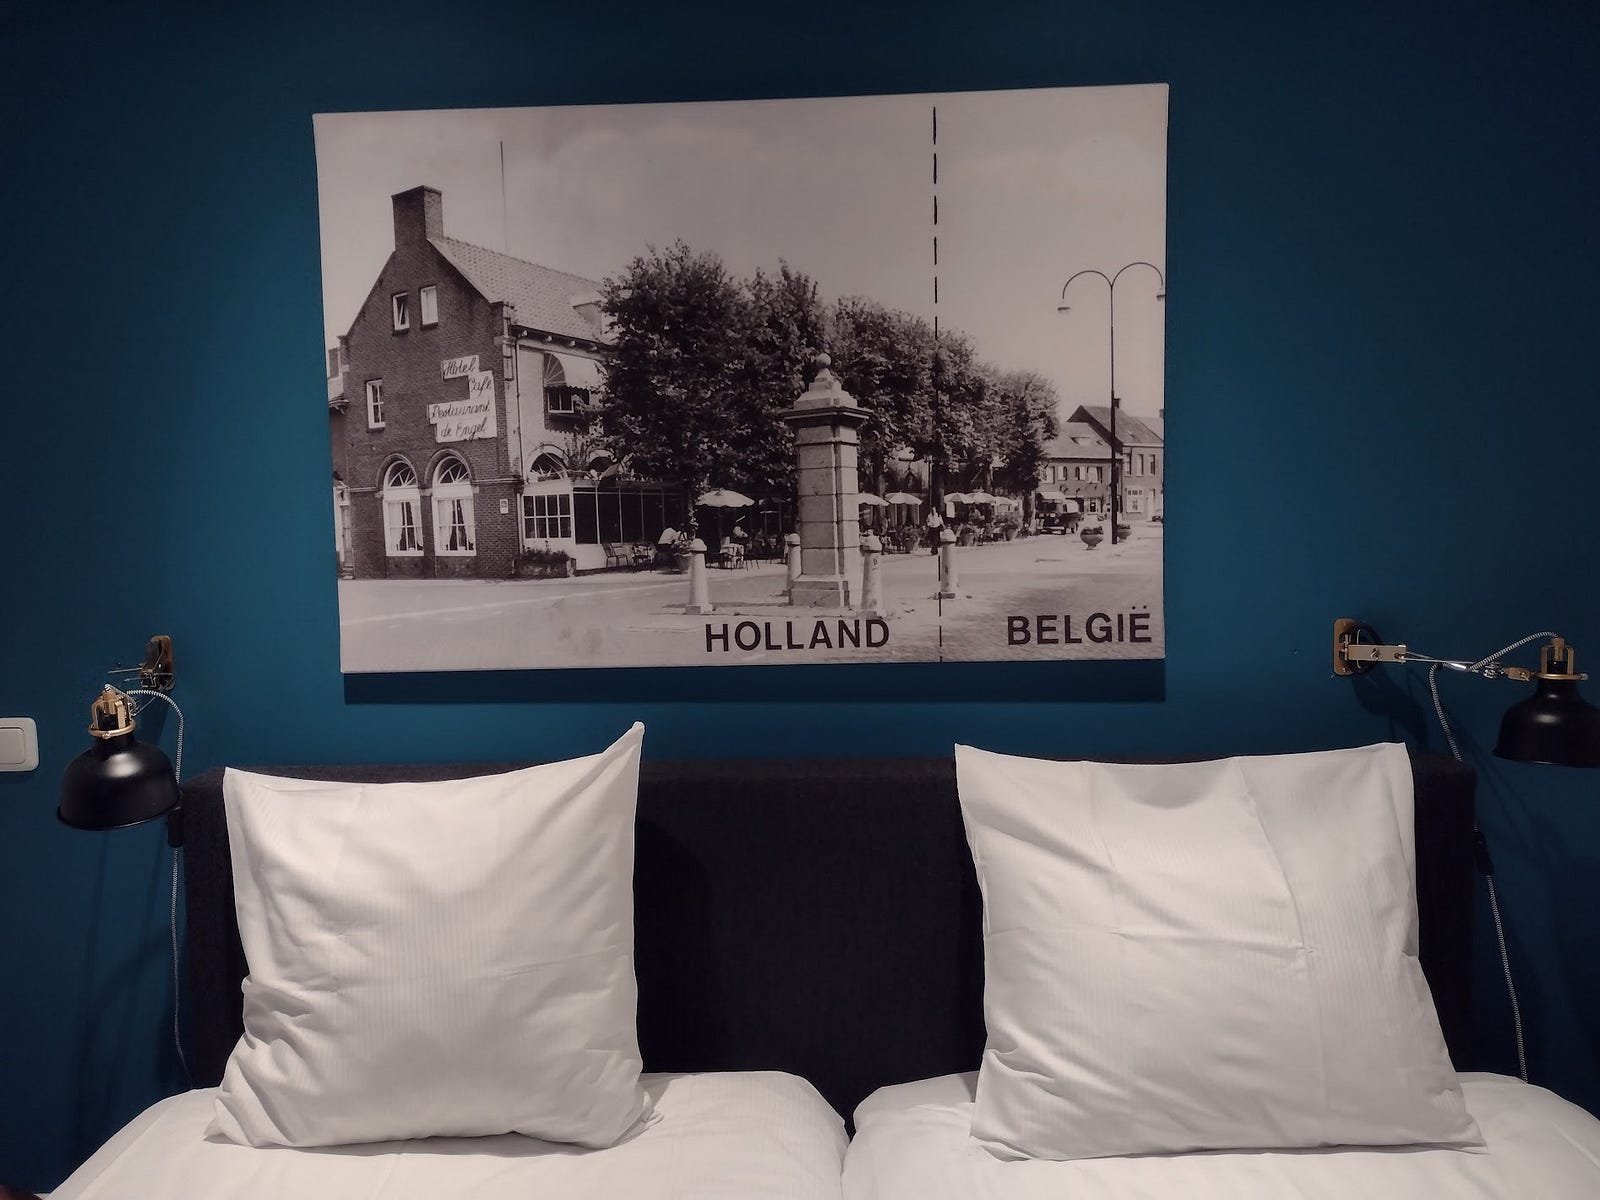 An ordinary hotel bedroom with a photo showing the historical border crossing